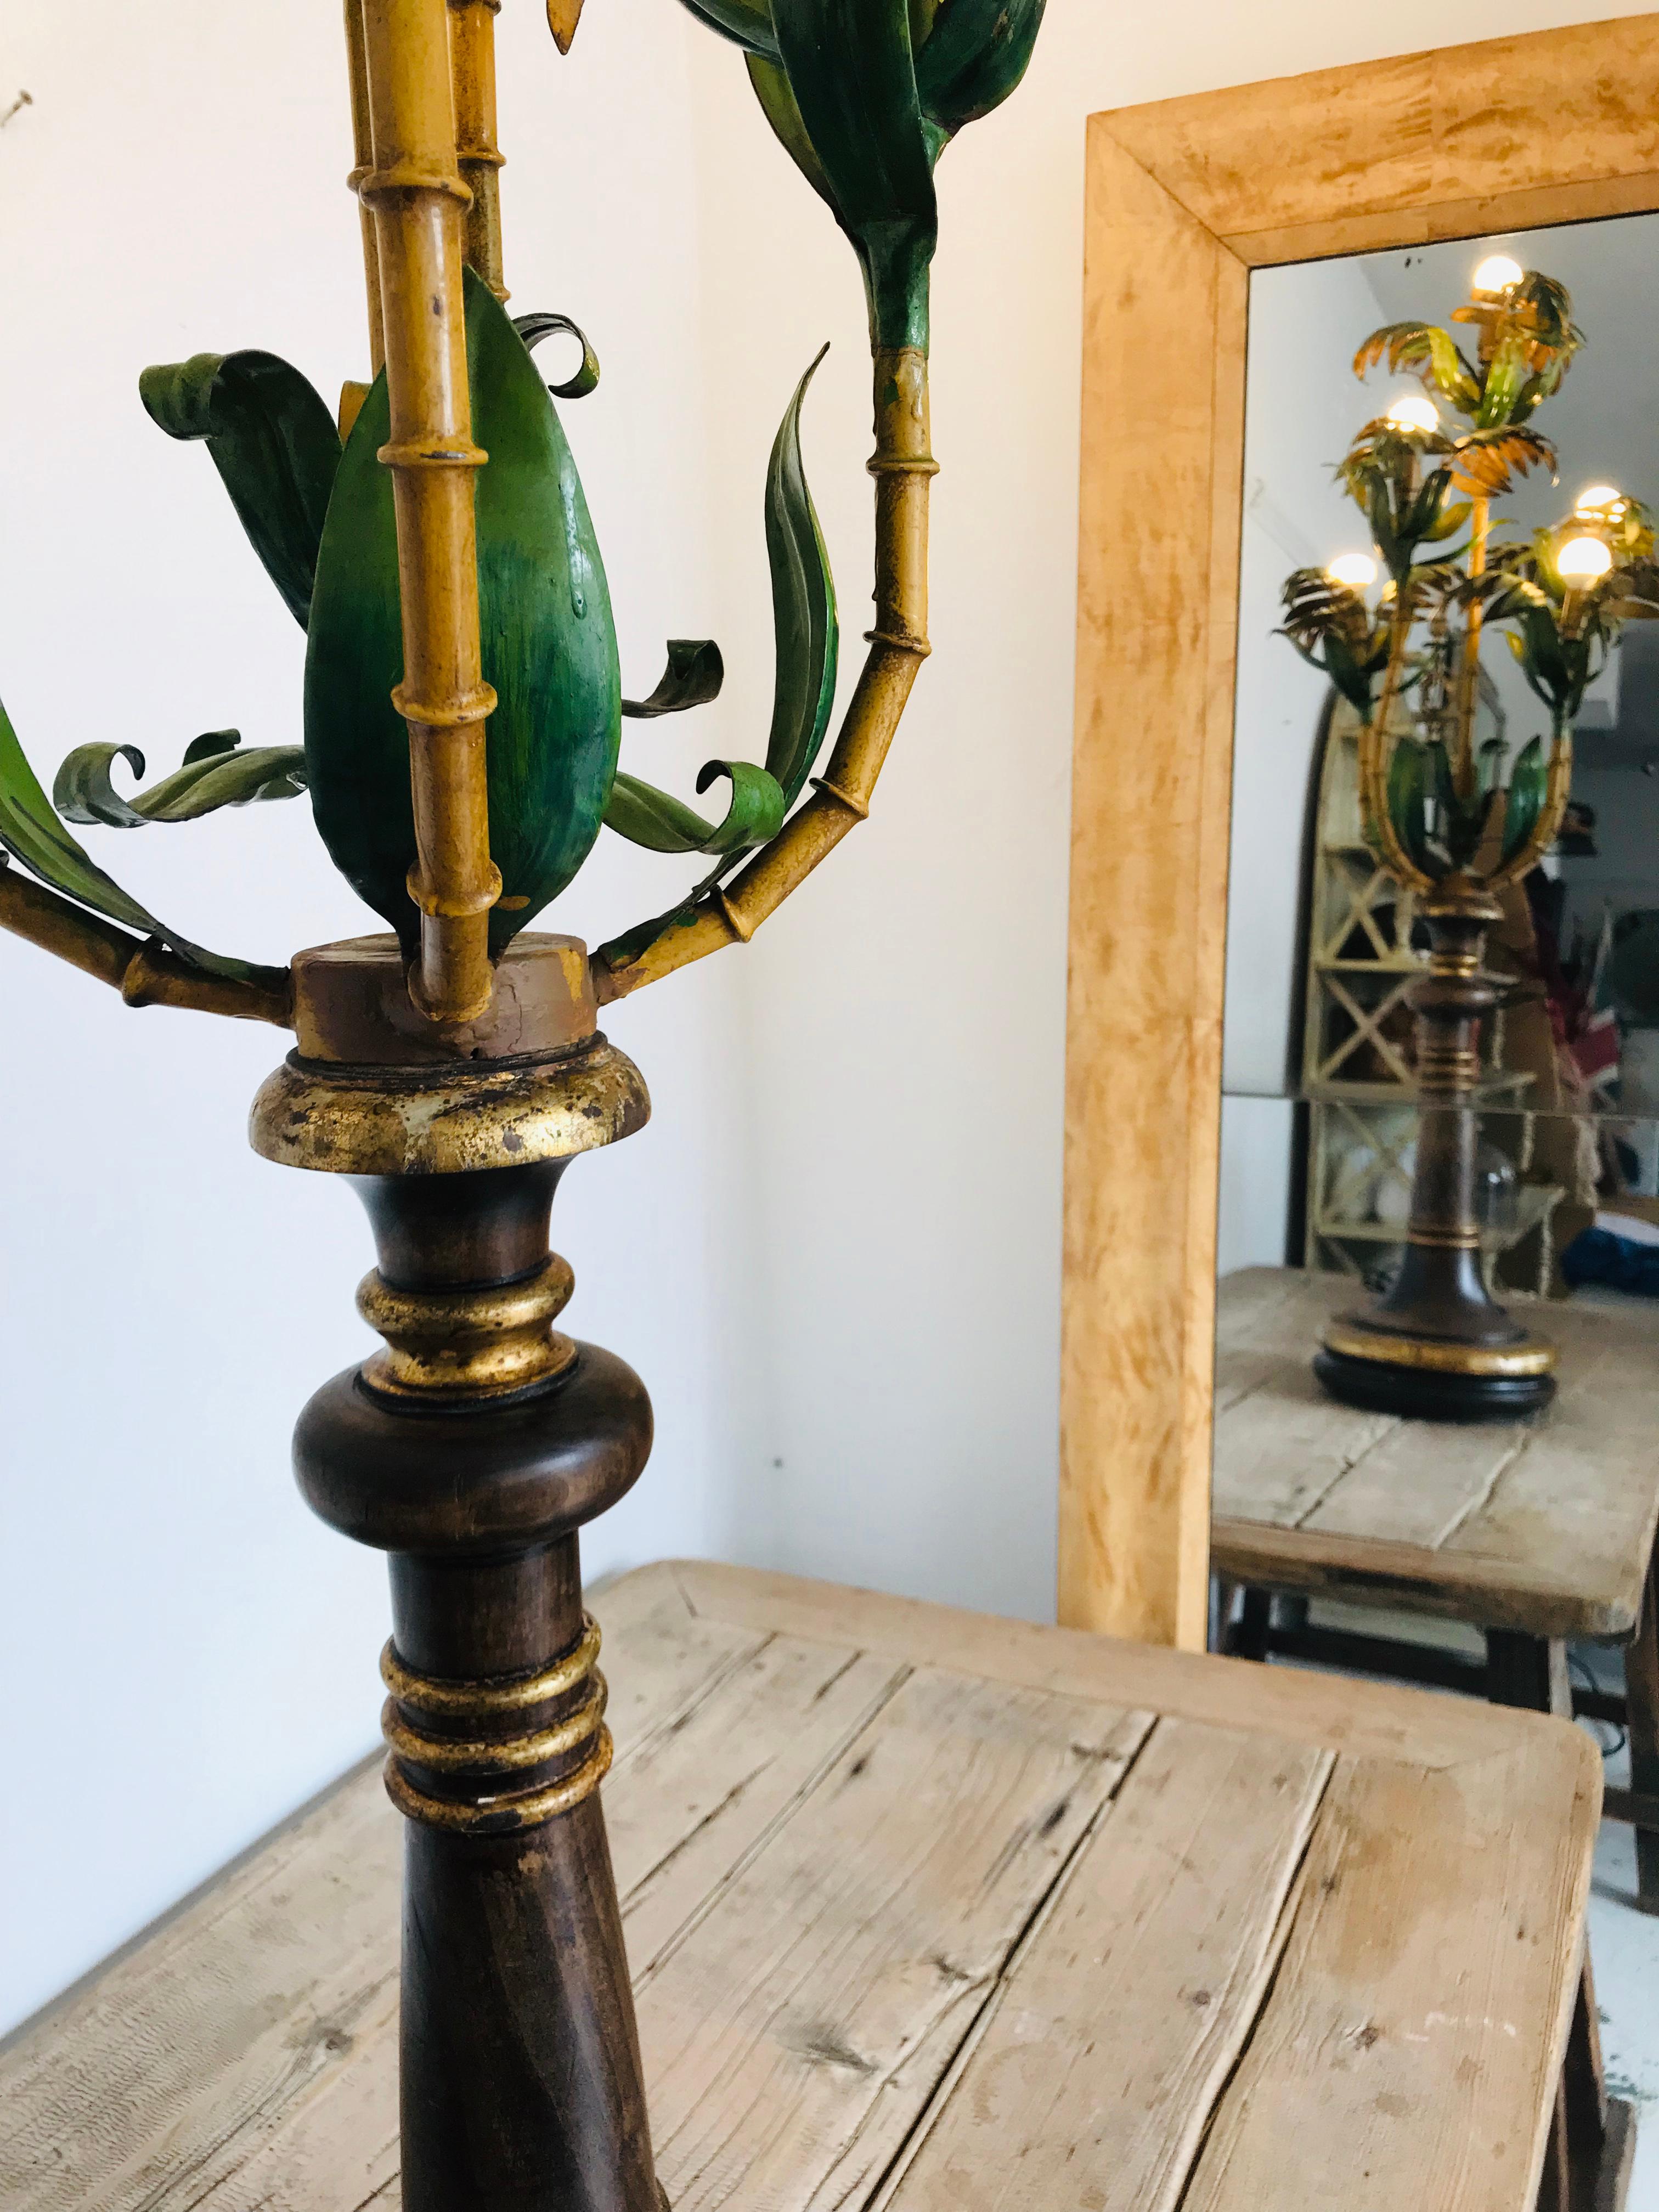 Spanish tropical Tôle Peinte faux palm lamp dating from the end of the 1950s. Tall enough to be a floor lamp, but a big statement when raised up and displayed on a table. This piece is painted metal and sits on a turned wood and gilded base.